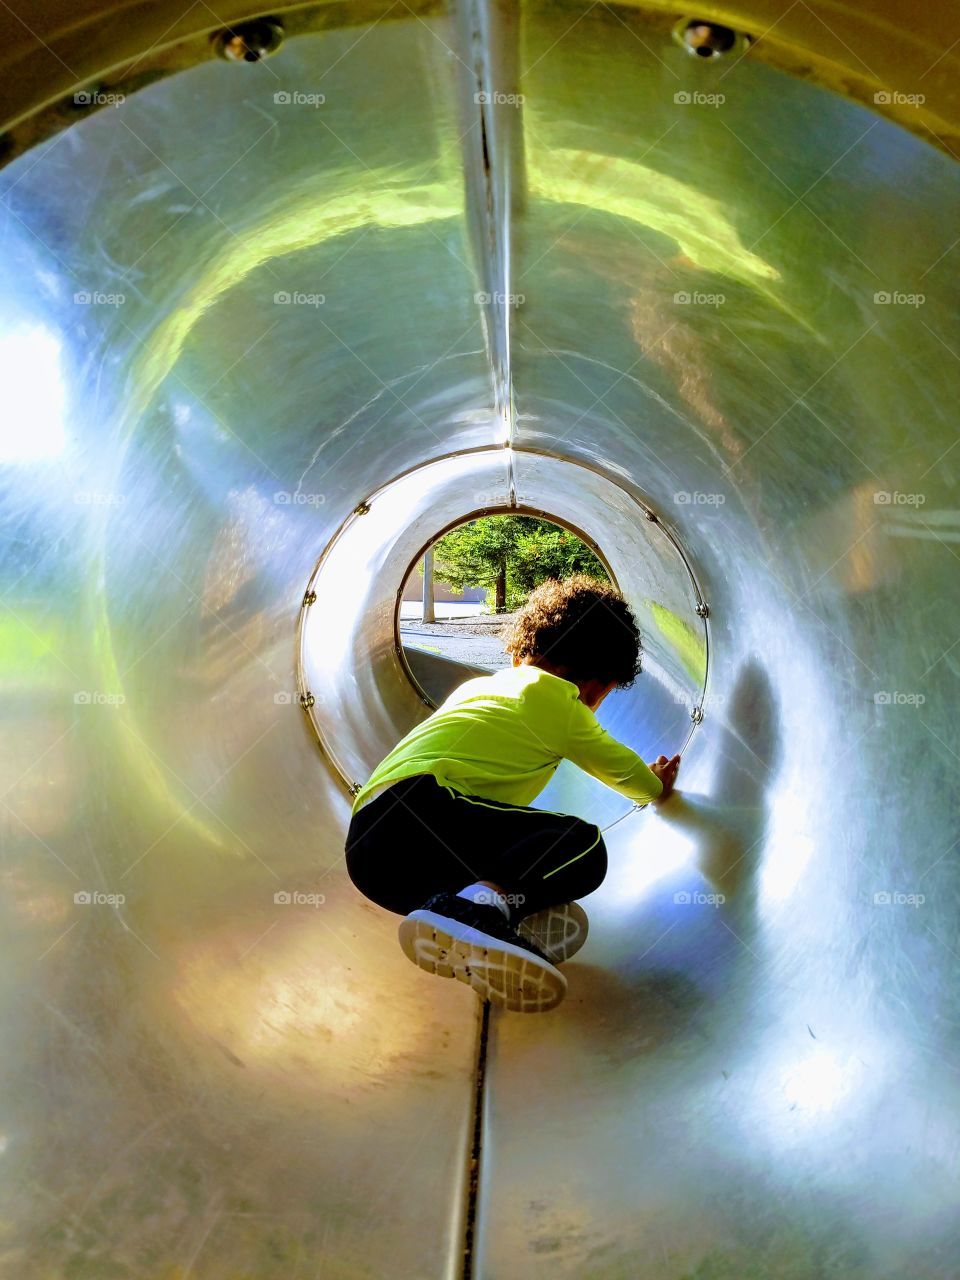 Kid In Tunnel At The Park